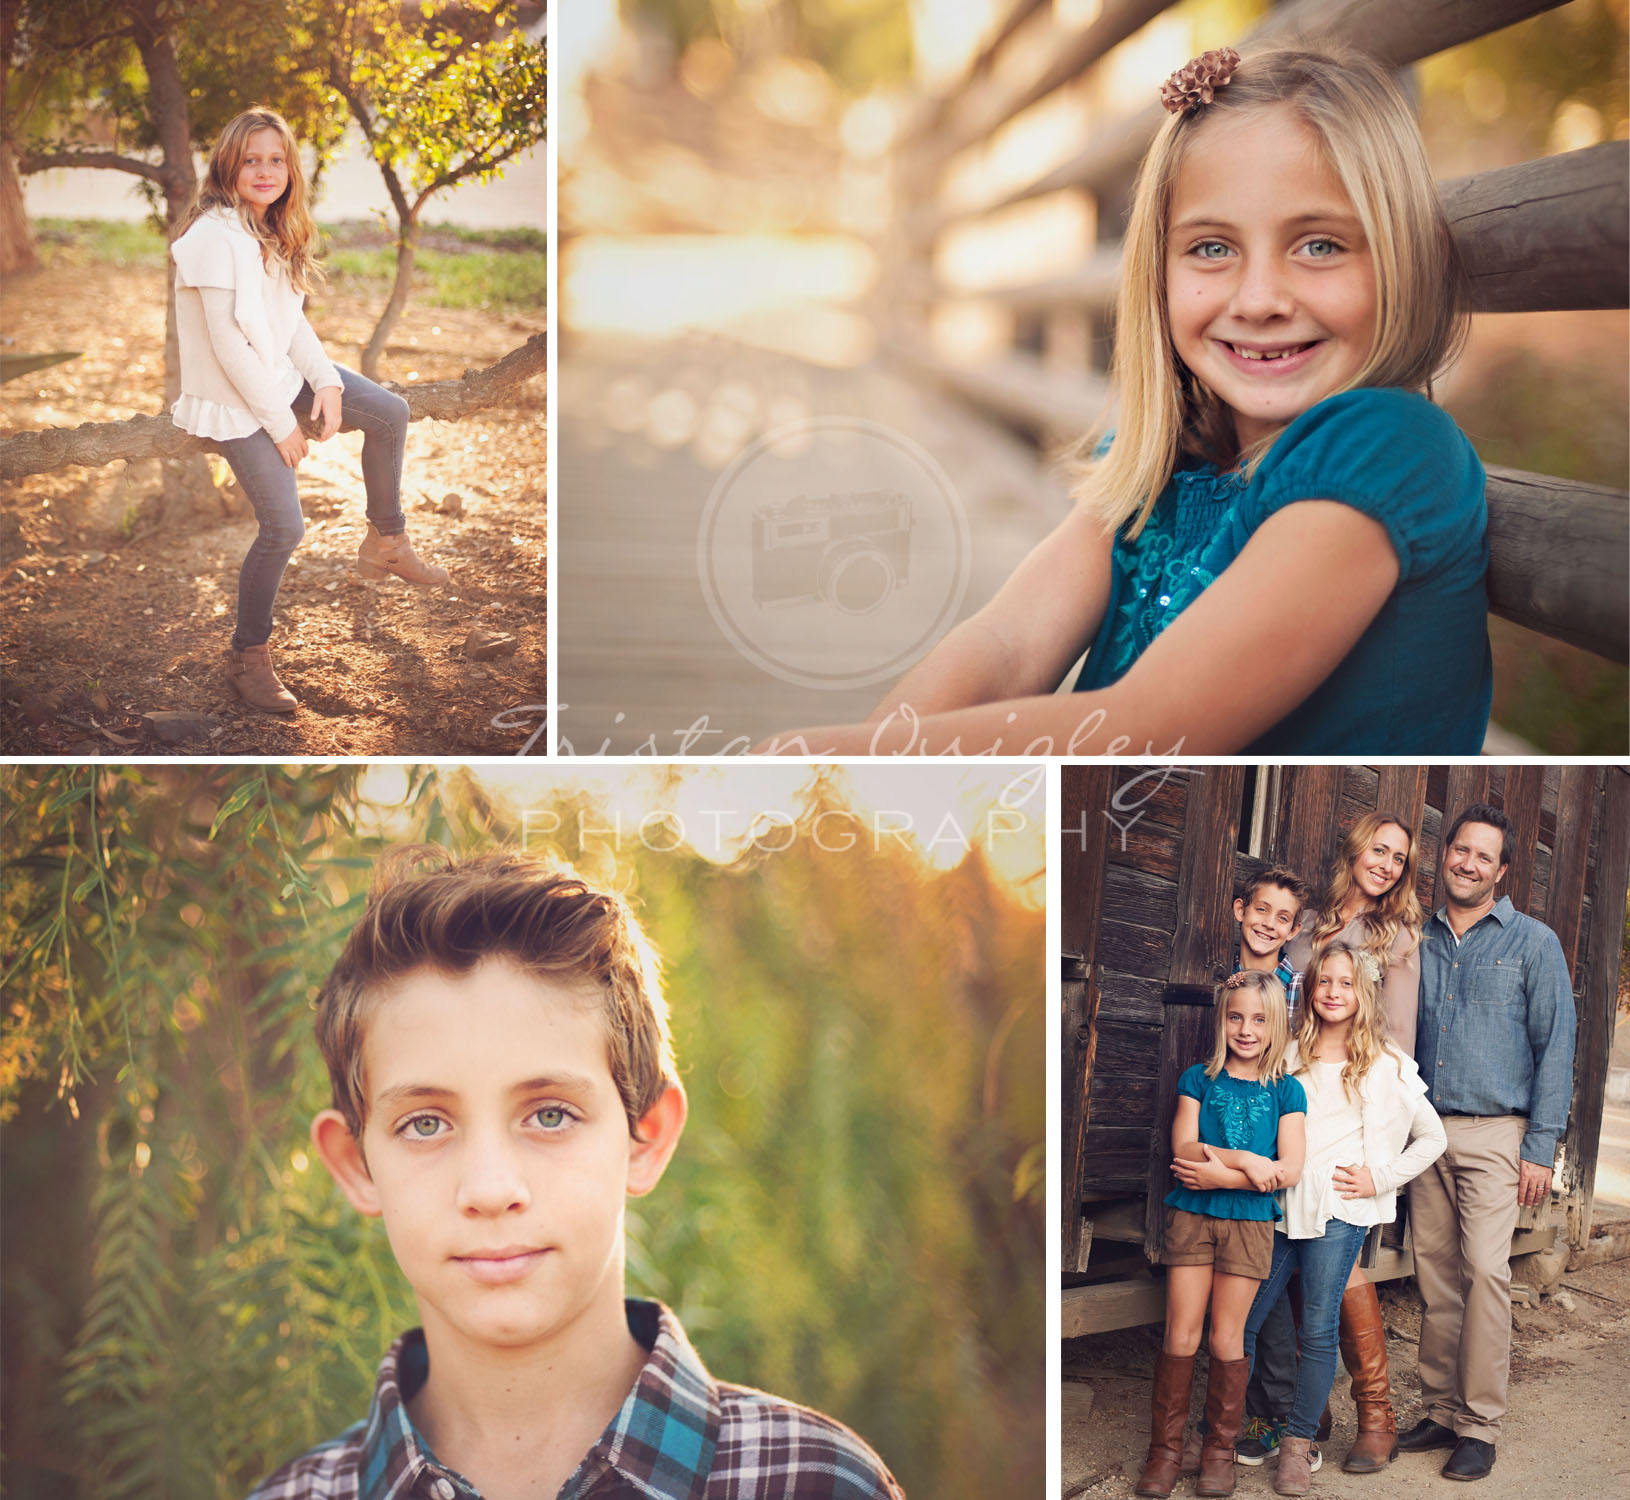 Carlsbad Family Photography - Carlsbad, CA- Tristan Quigley Photography